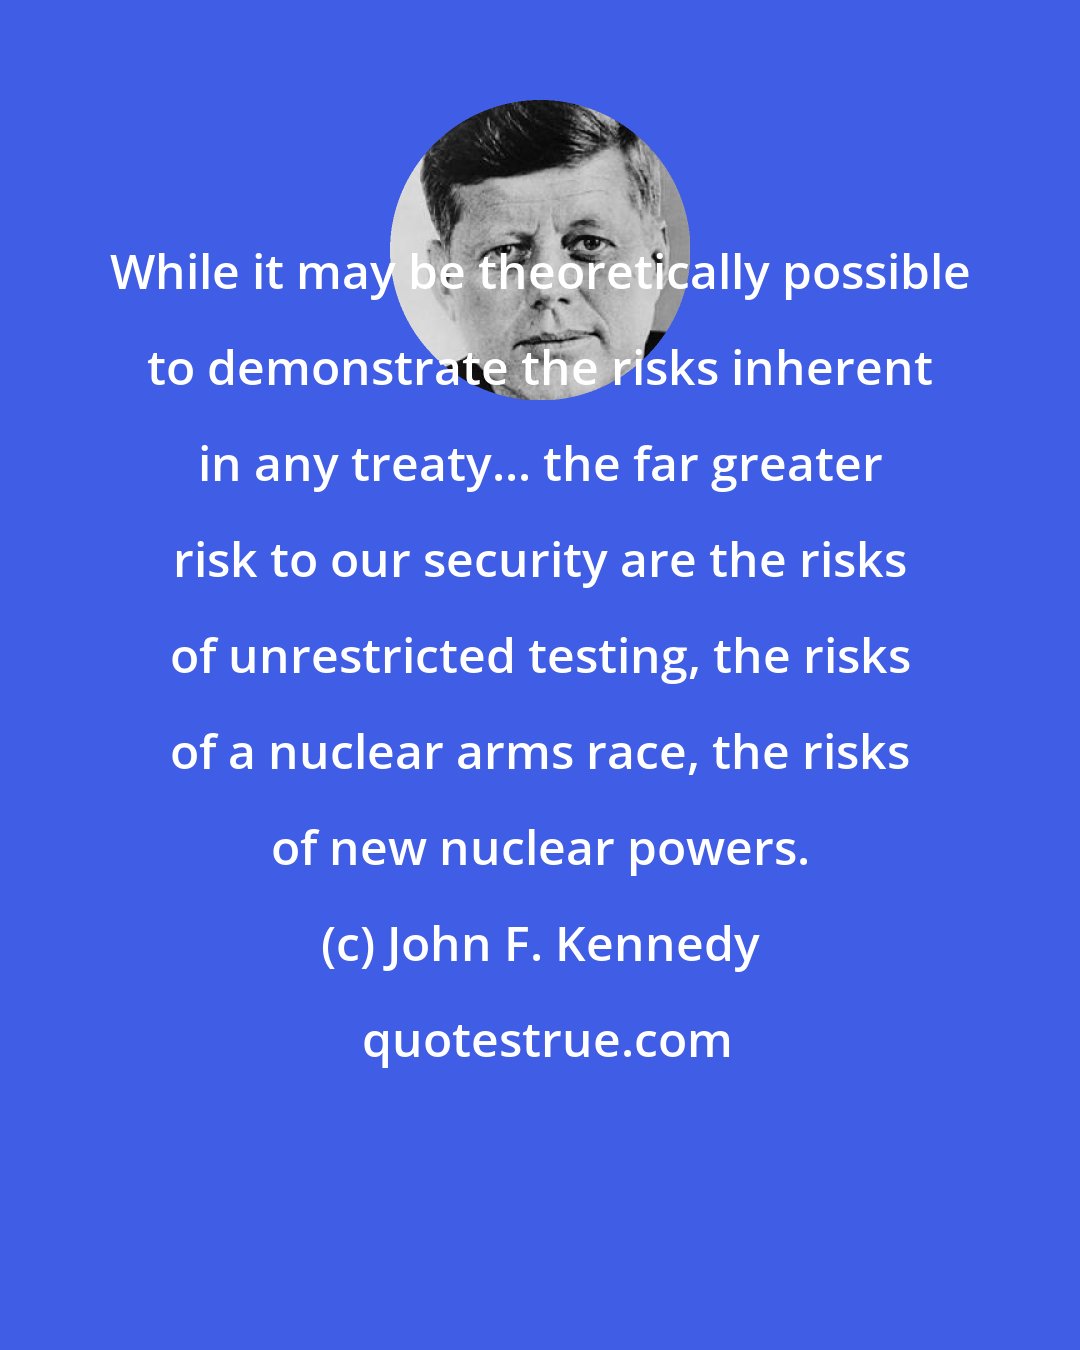 John F. Kennedy: While it may be theoretically possible to demonstrate the risks inherent in any treaty... the far greater risk to our security are the risks of unrestricted testing, the risks of a nuclear arms race, the risks of new nuclear powers.